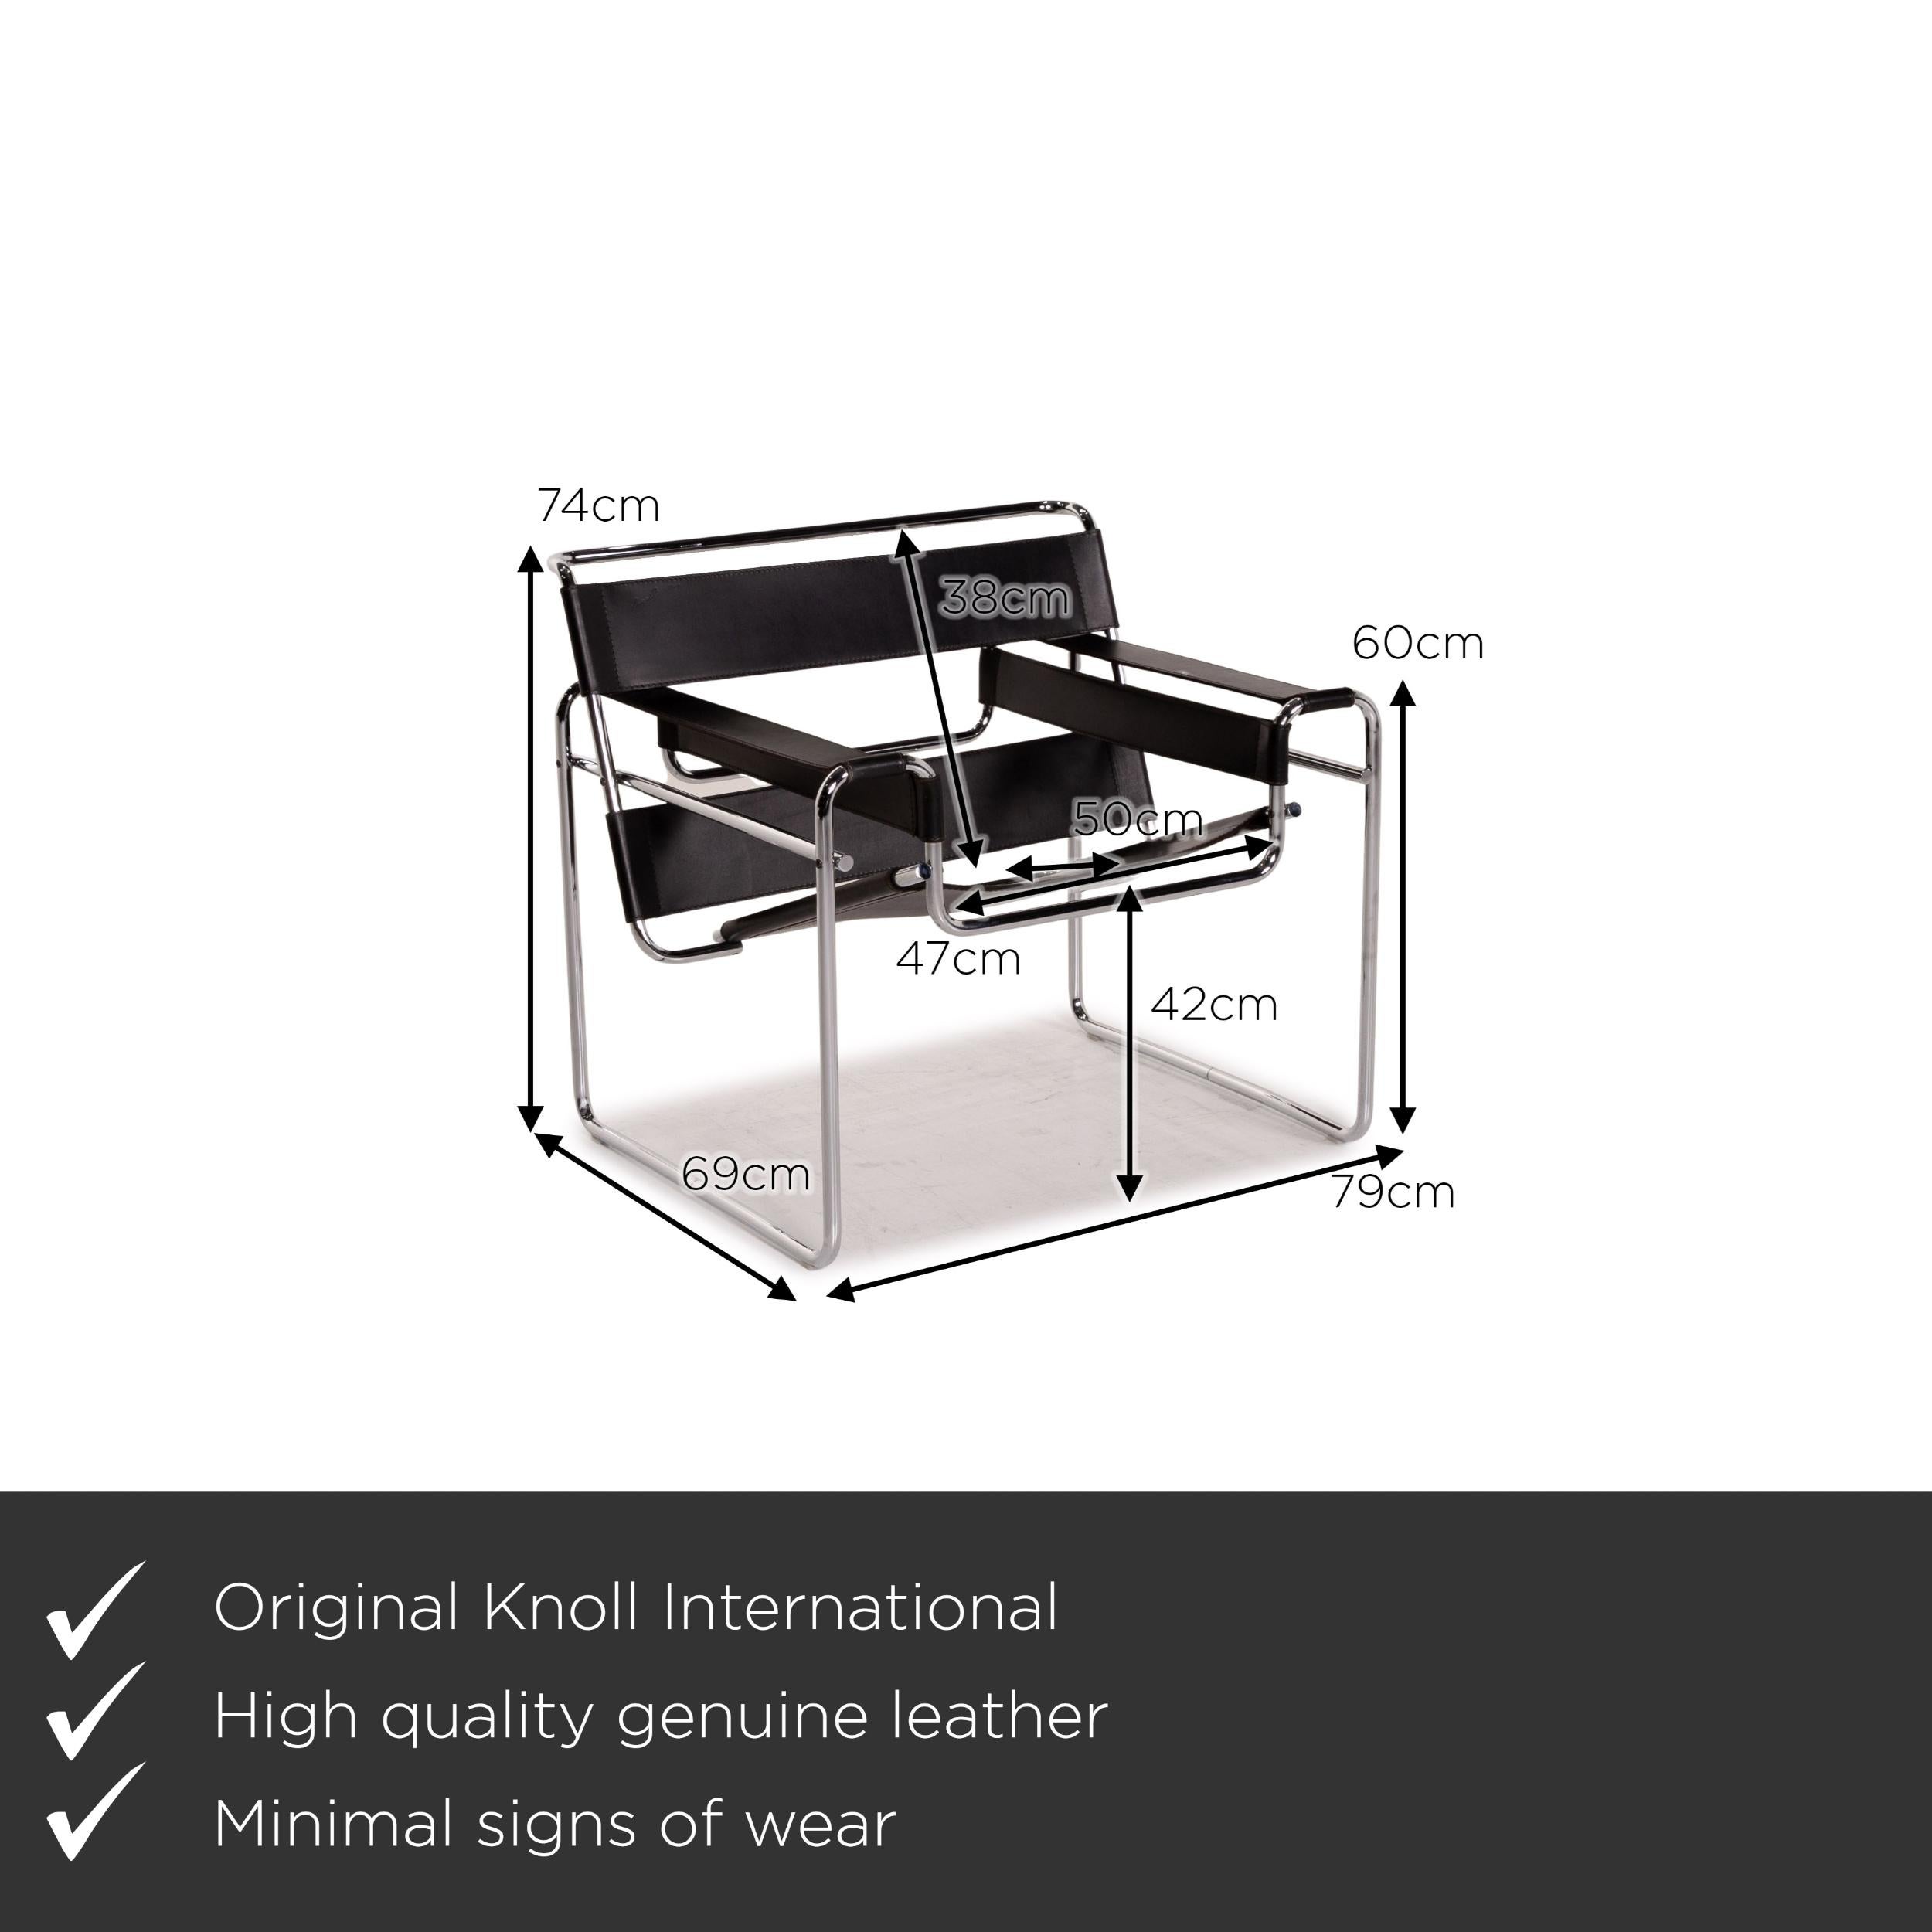 We present to you a Knoll International Wassily chair leather armchair black chair Marcel Breuer.


 Product measurements in centimeters:
 

Depth: 69
Width: 79
Height: 74
Seat height: 42
Rest height: 60
Seat depth: 50
Seat width: